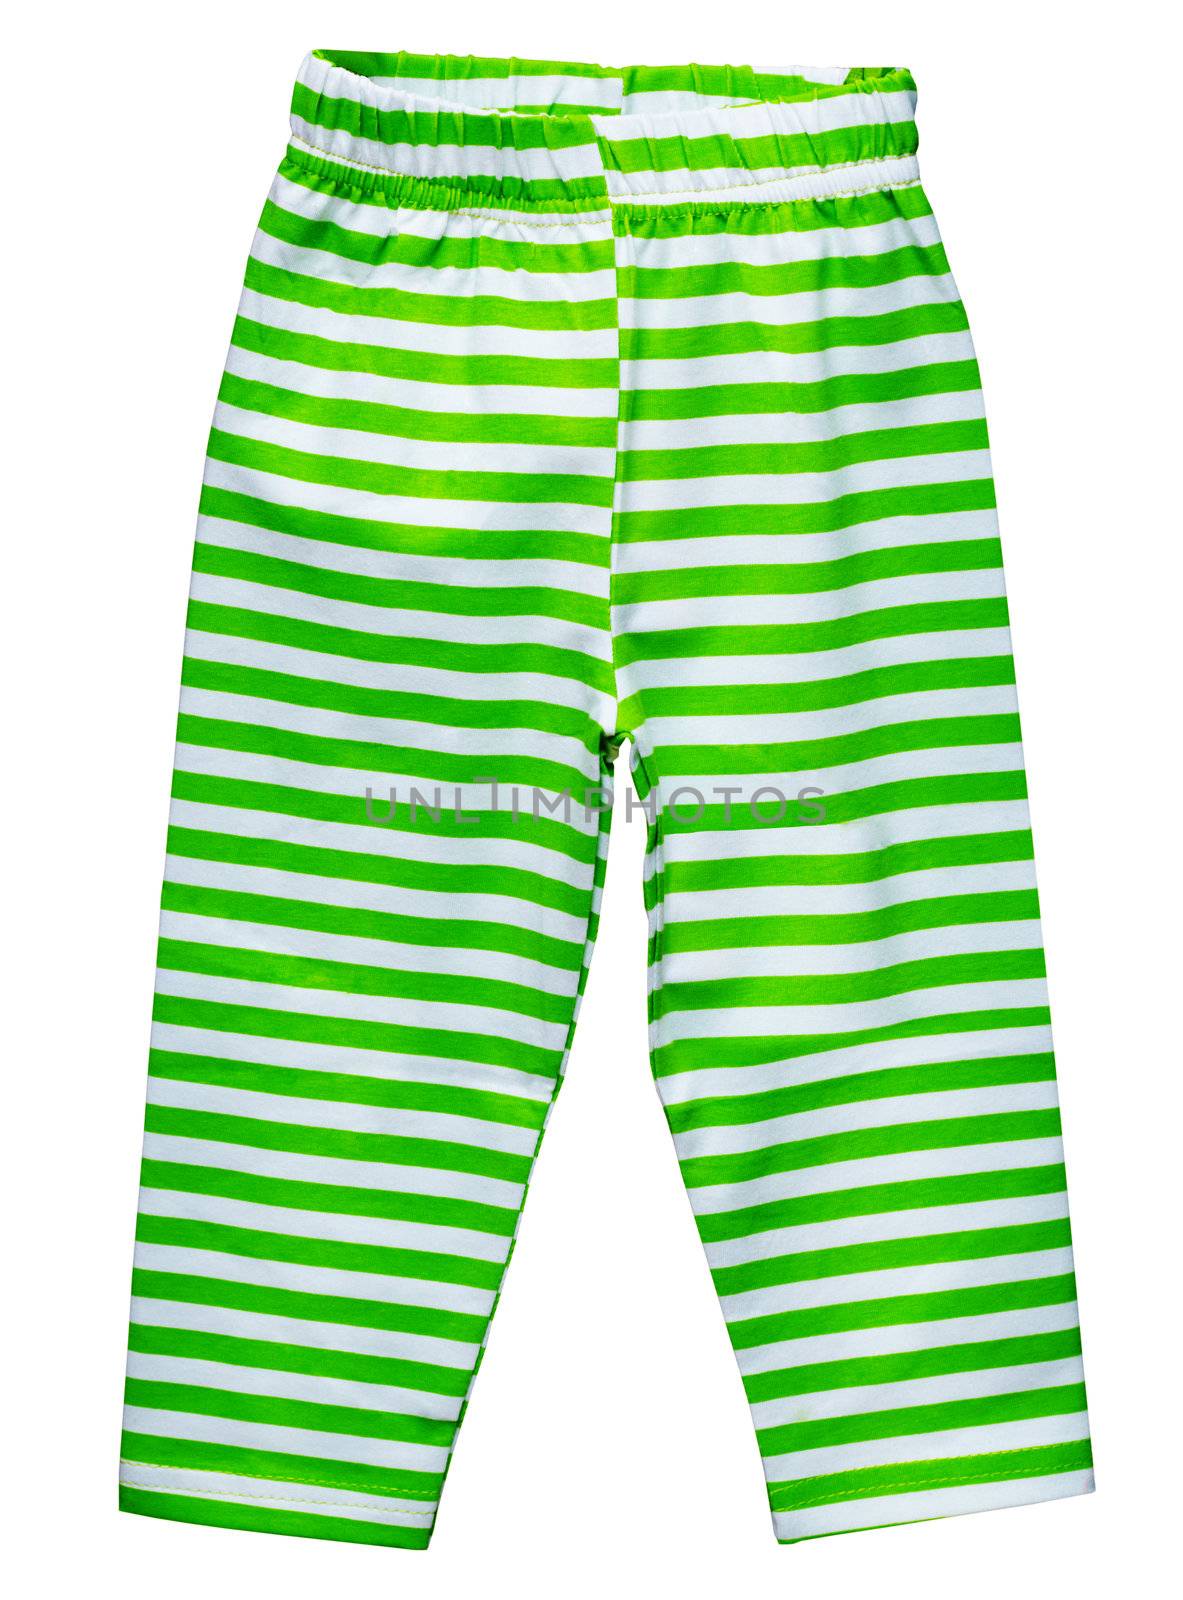 Pants in green strip for children isolated on white background